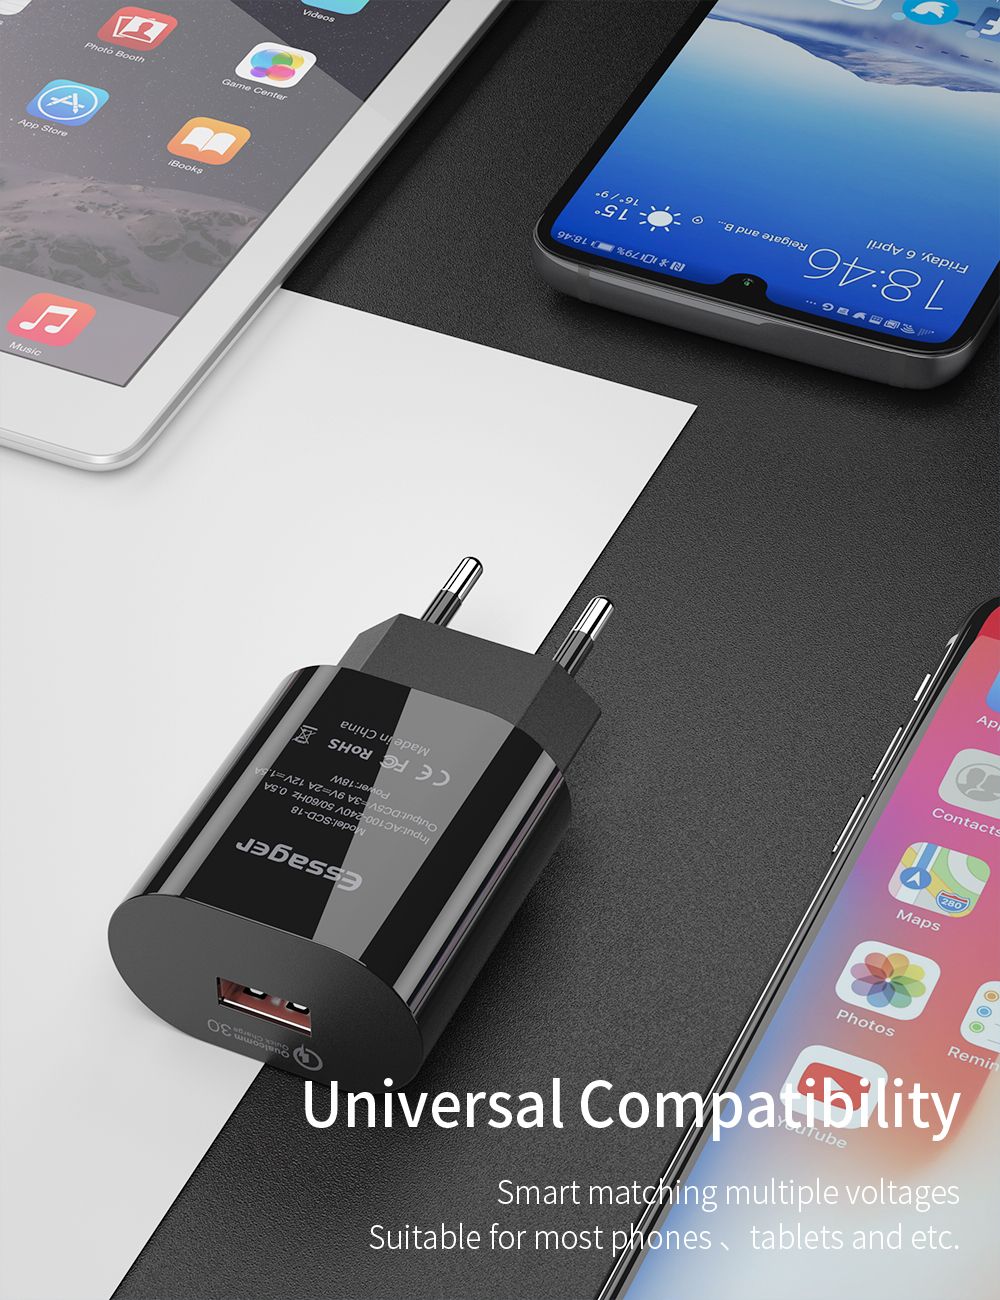 Essager-18W-3A-QC30-Fast-Charging-USB-Charger-For-iPhone-X-XS-Max-HUAWEI-P30-Pro-Mate-20-S9-S10-S10-1506734